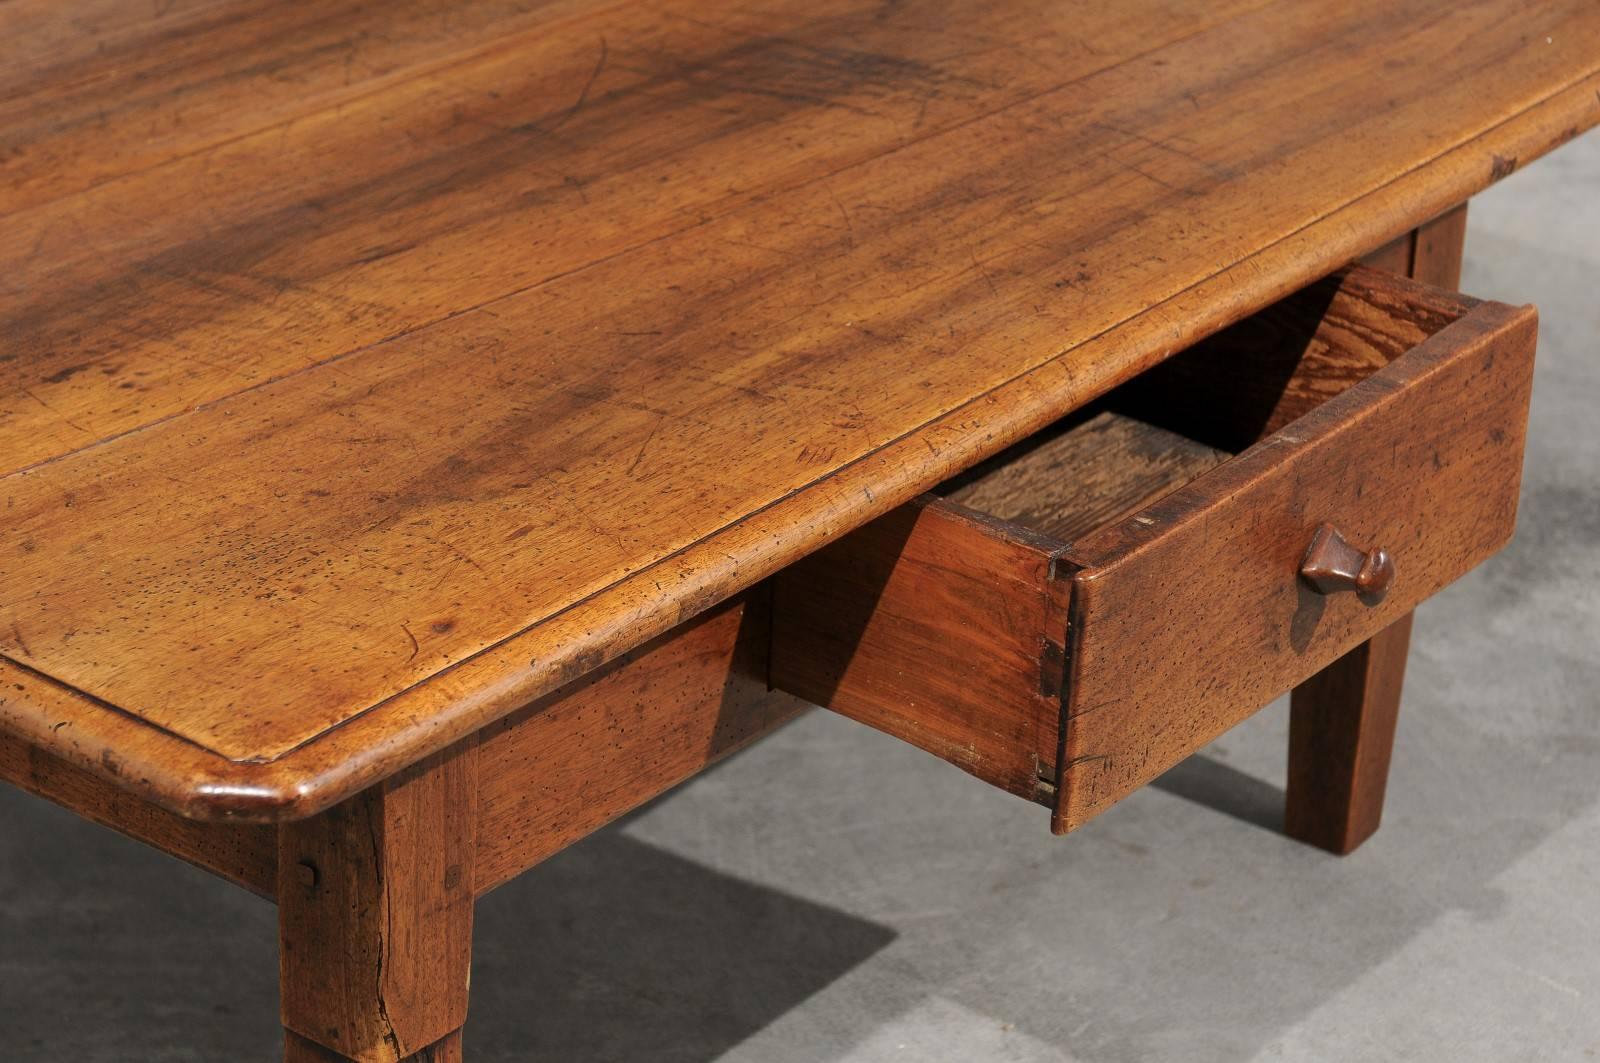 19th Century French Walnut Coffee Table with Single Drawer and Tapered Legs from the 1870s